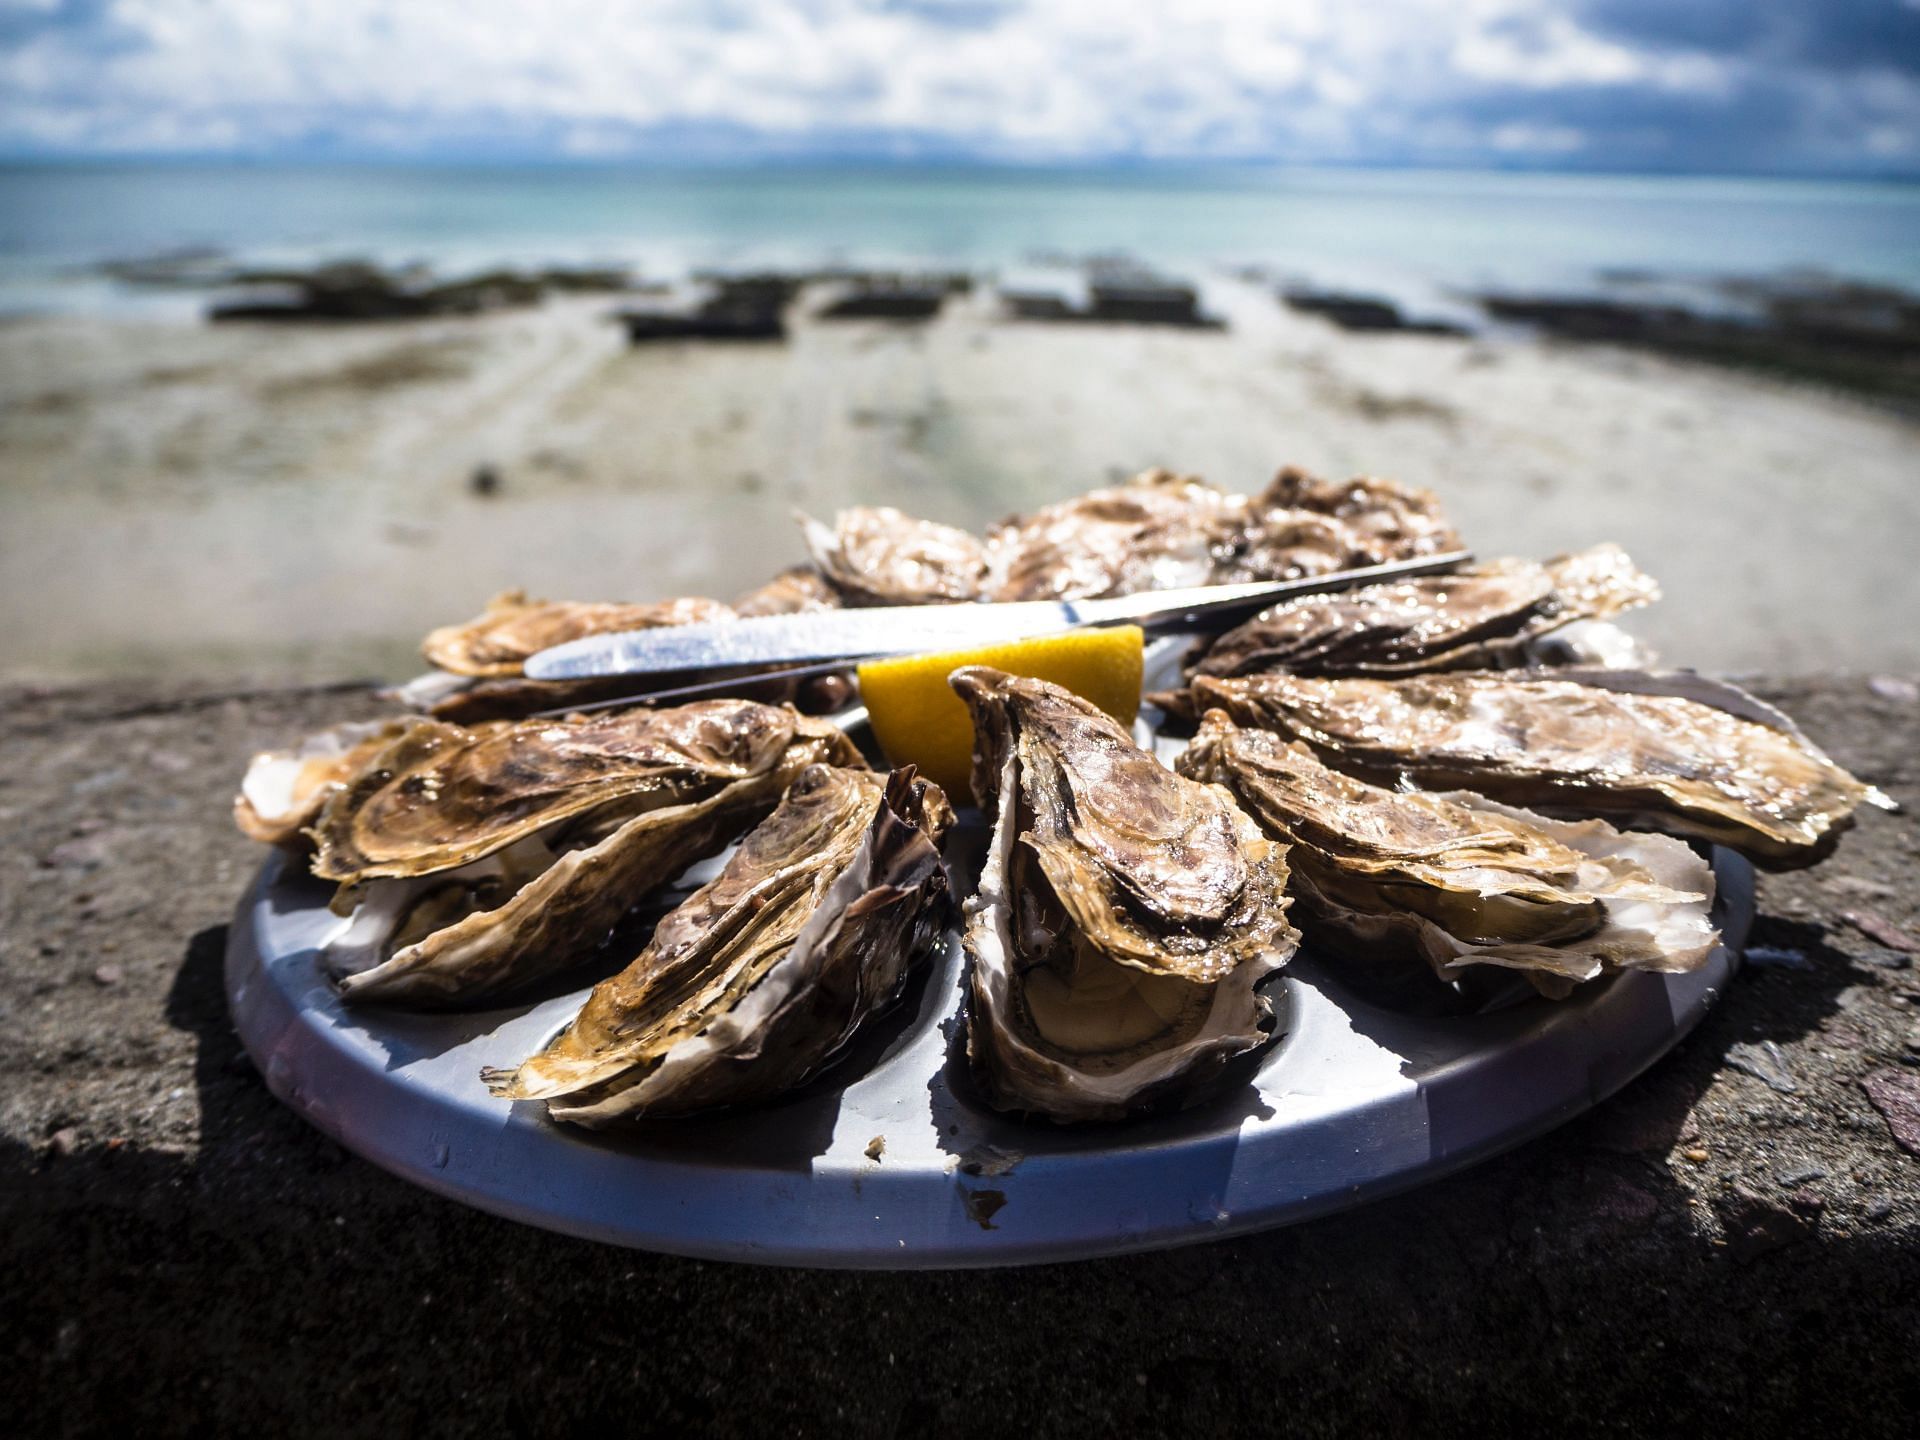 Oysters must be cooked well before consuming. (Image via Unsplash/ Tommaso Cantelli)